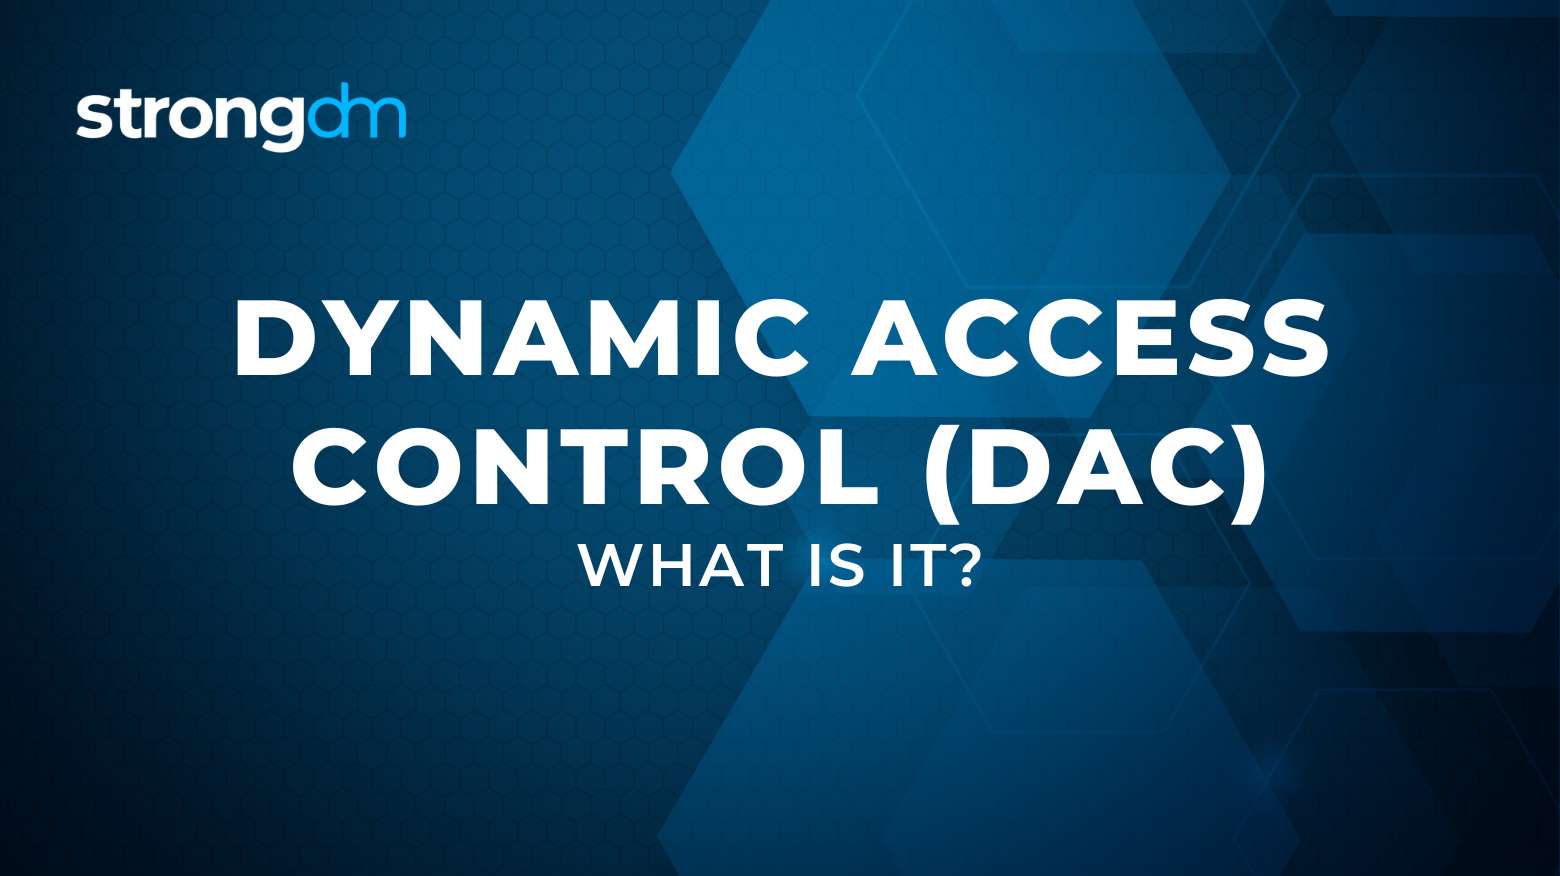 DAC Definition - What is a DAC?